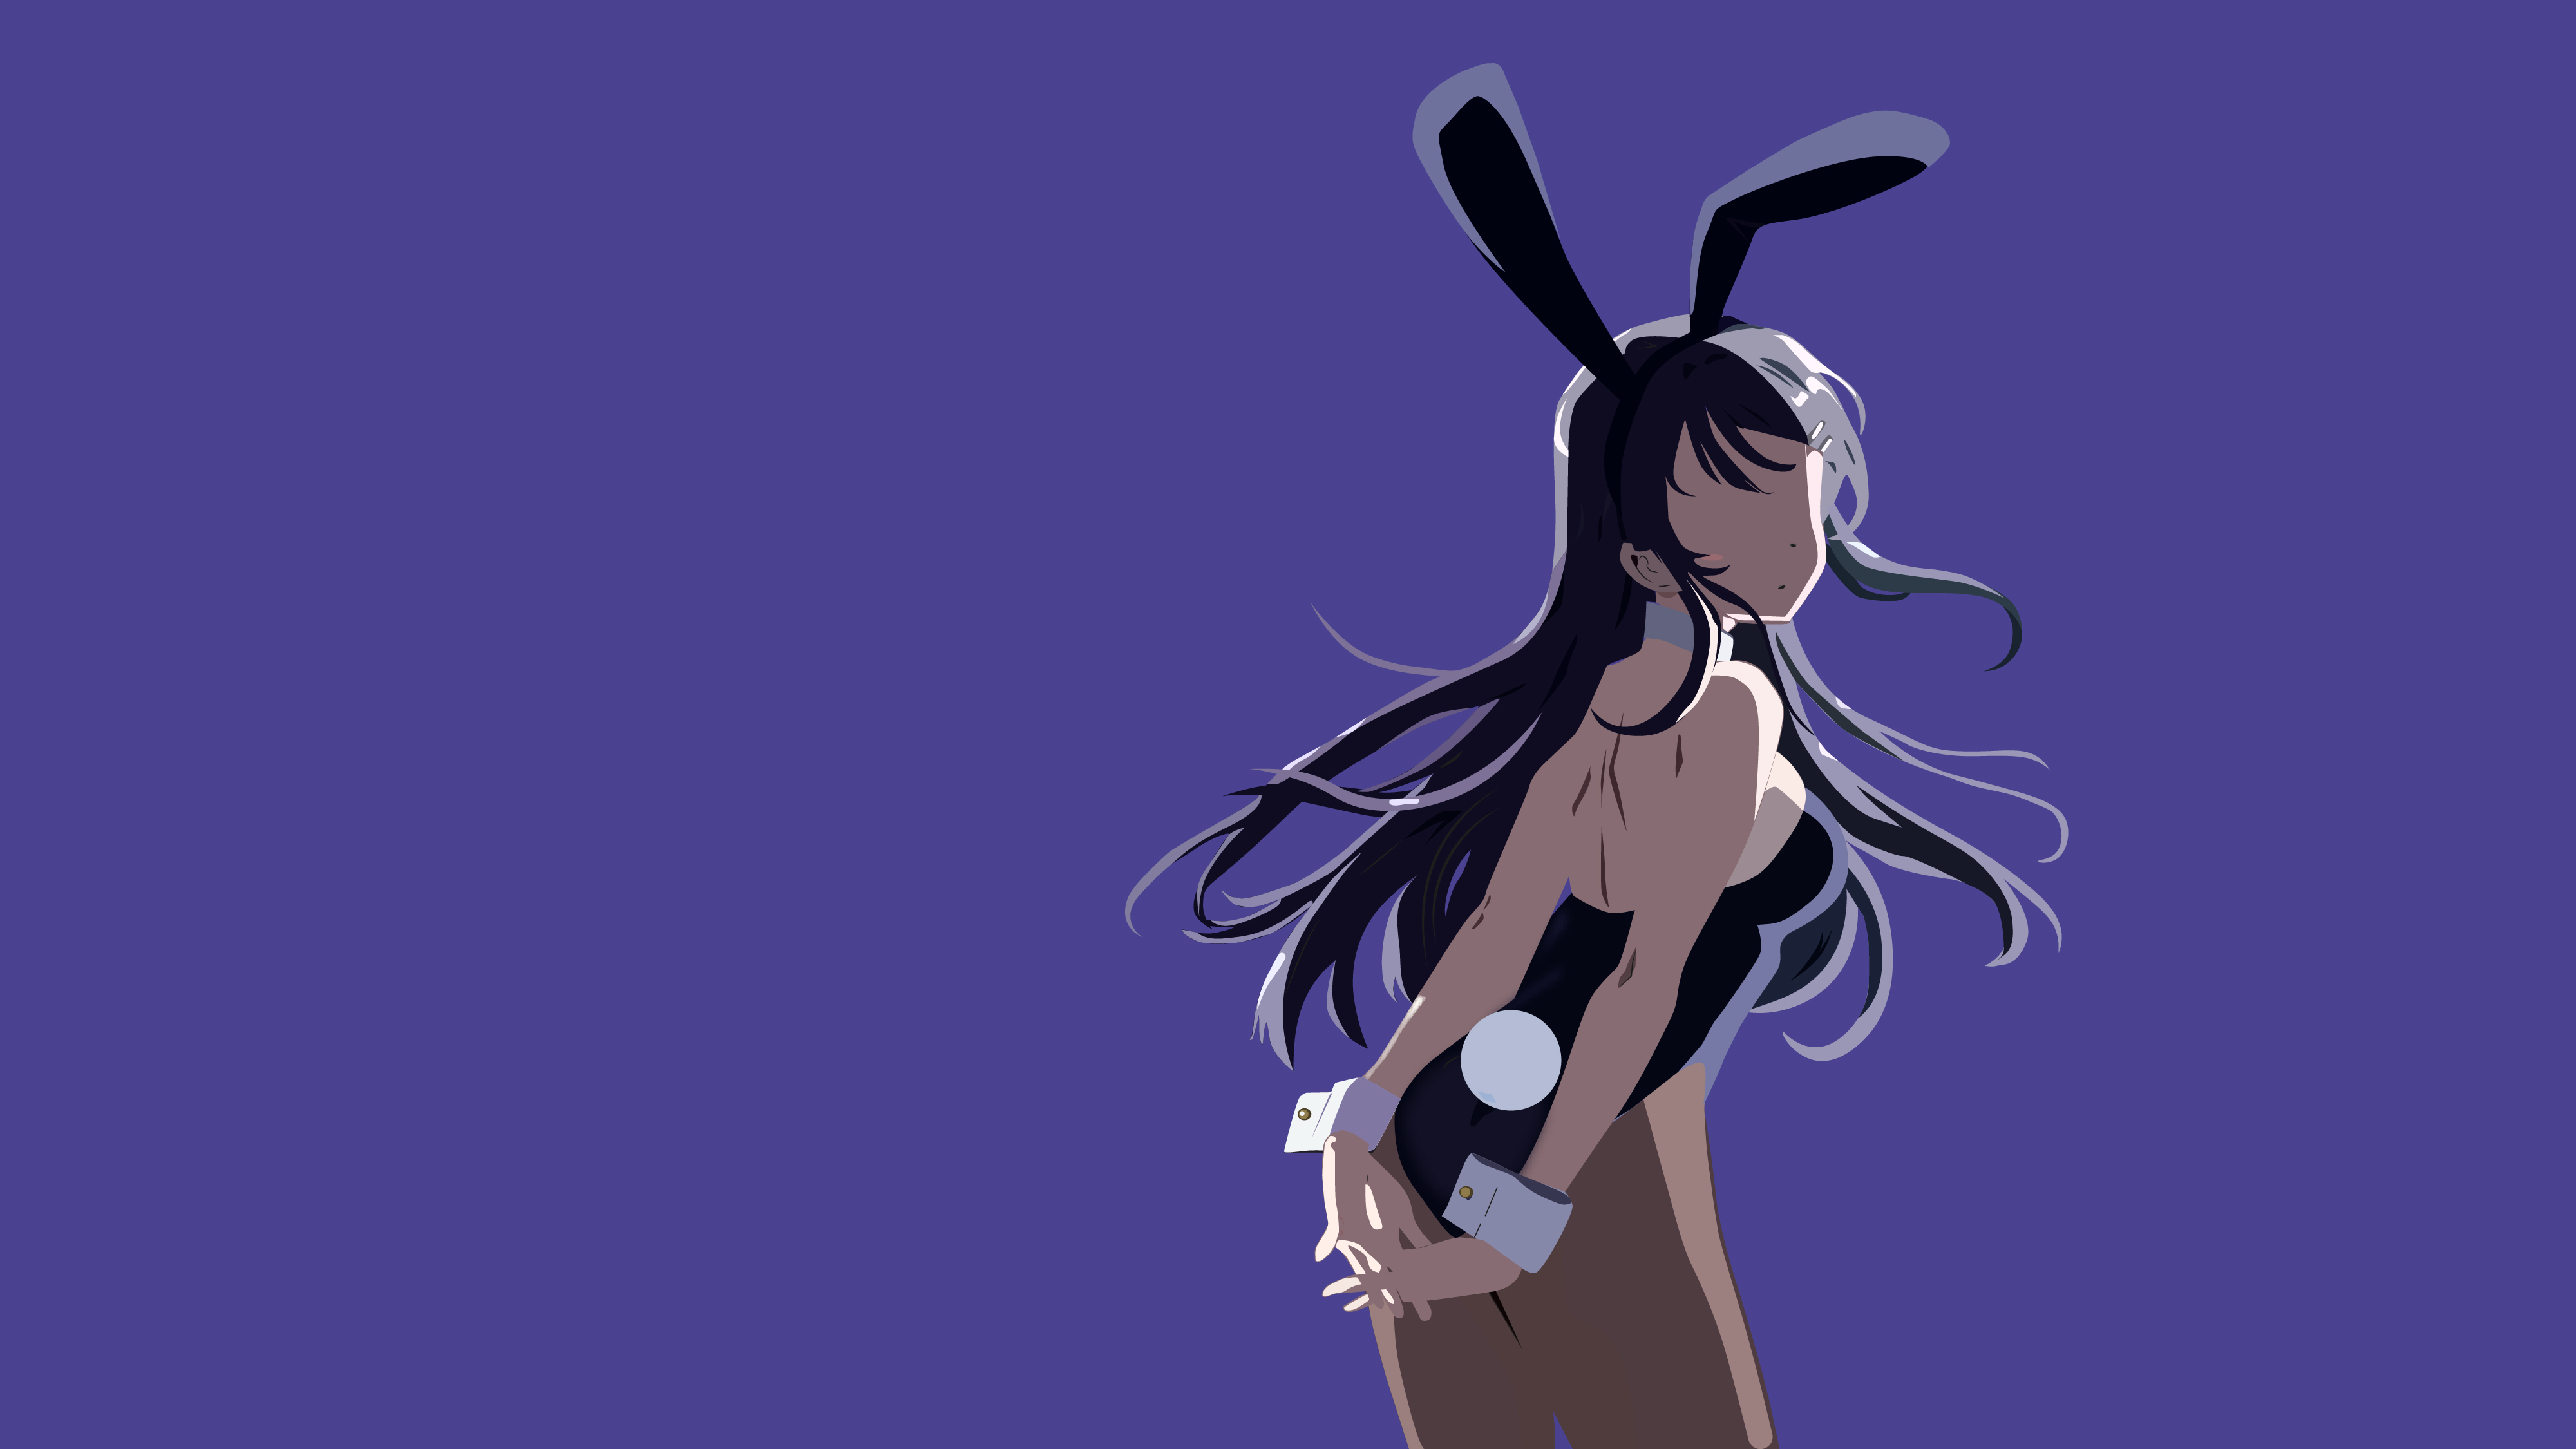 Bunny girl pictures